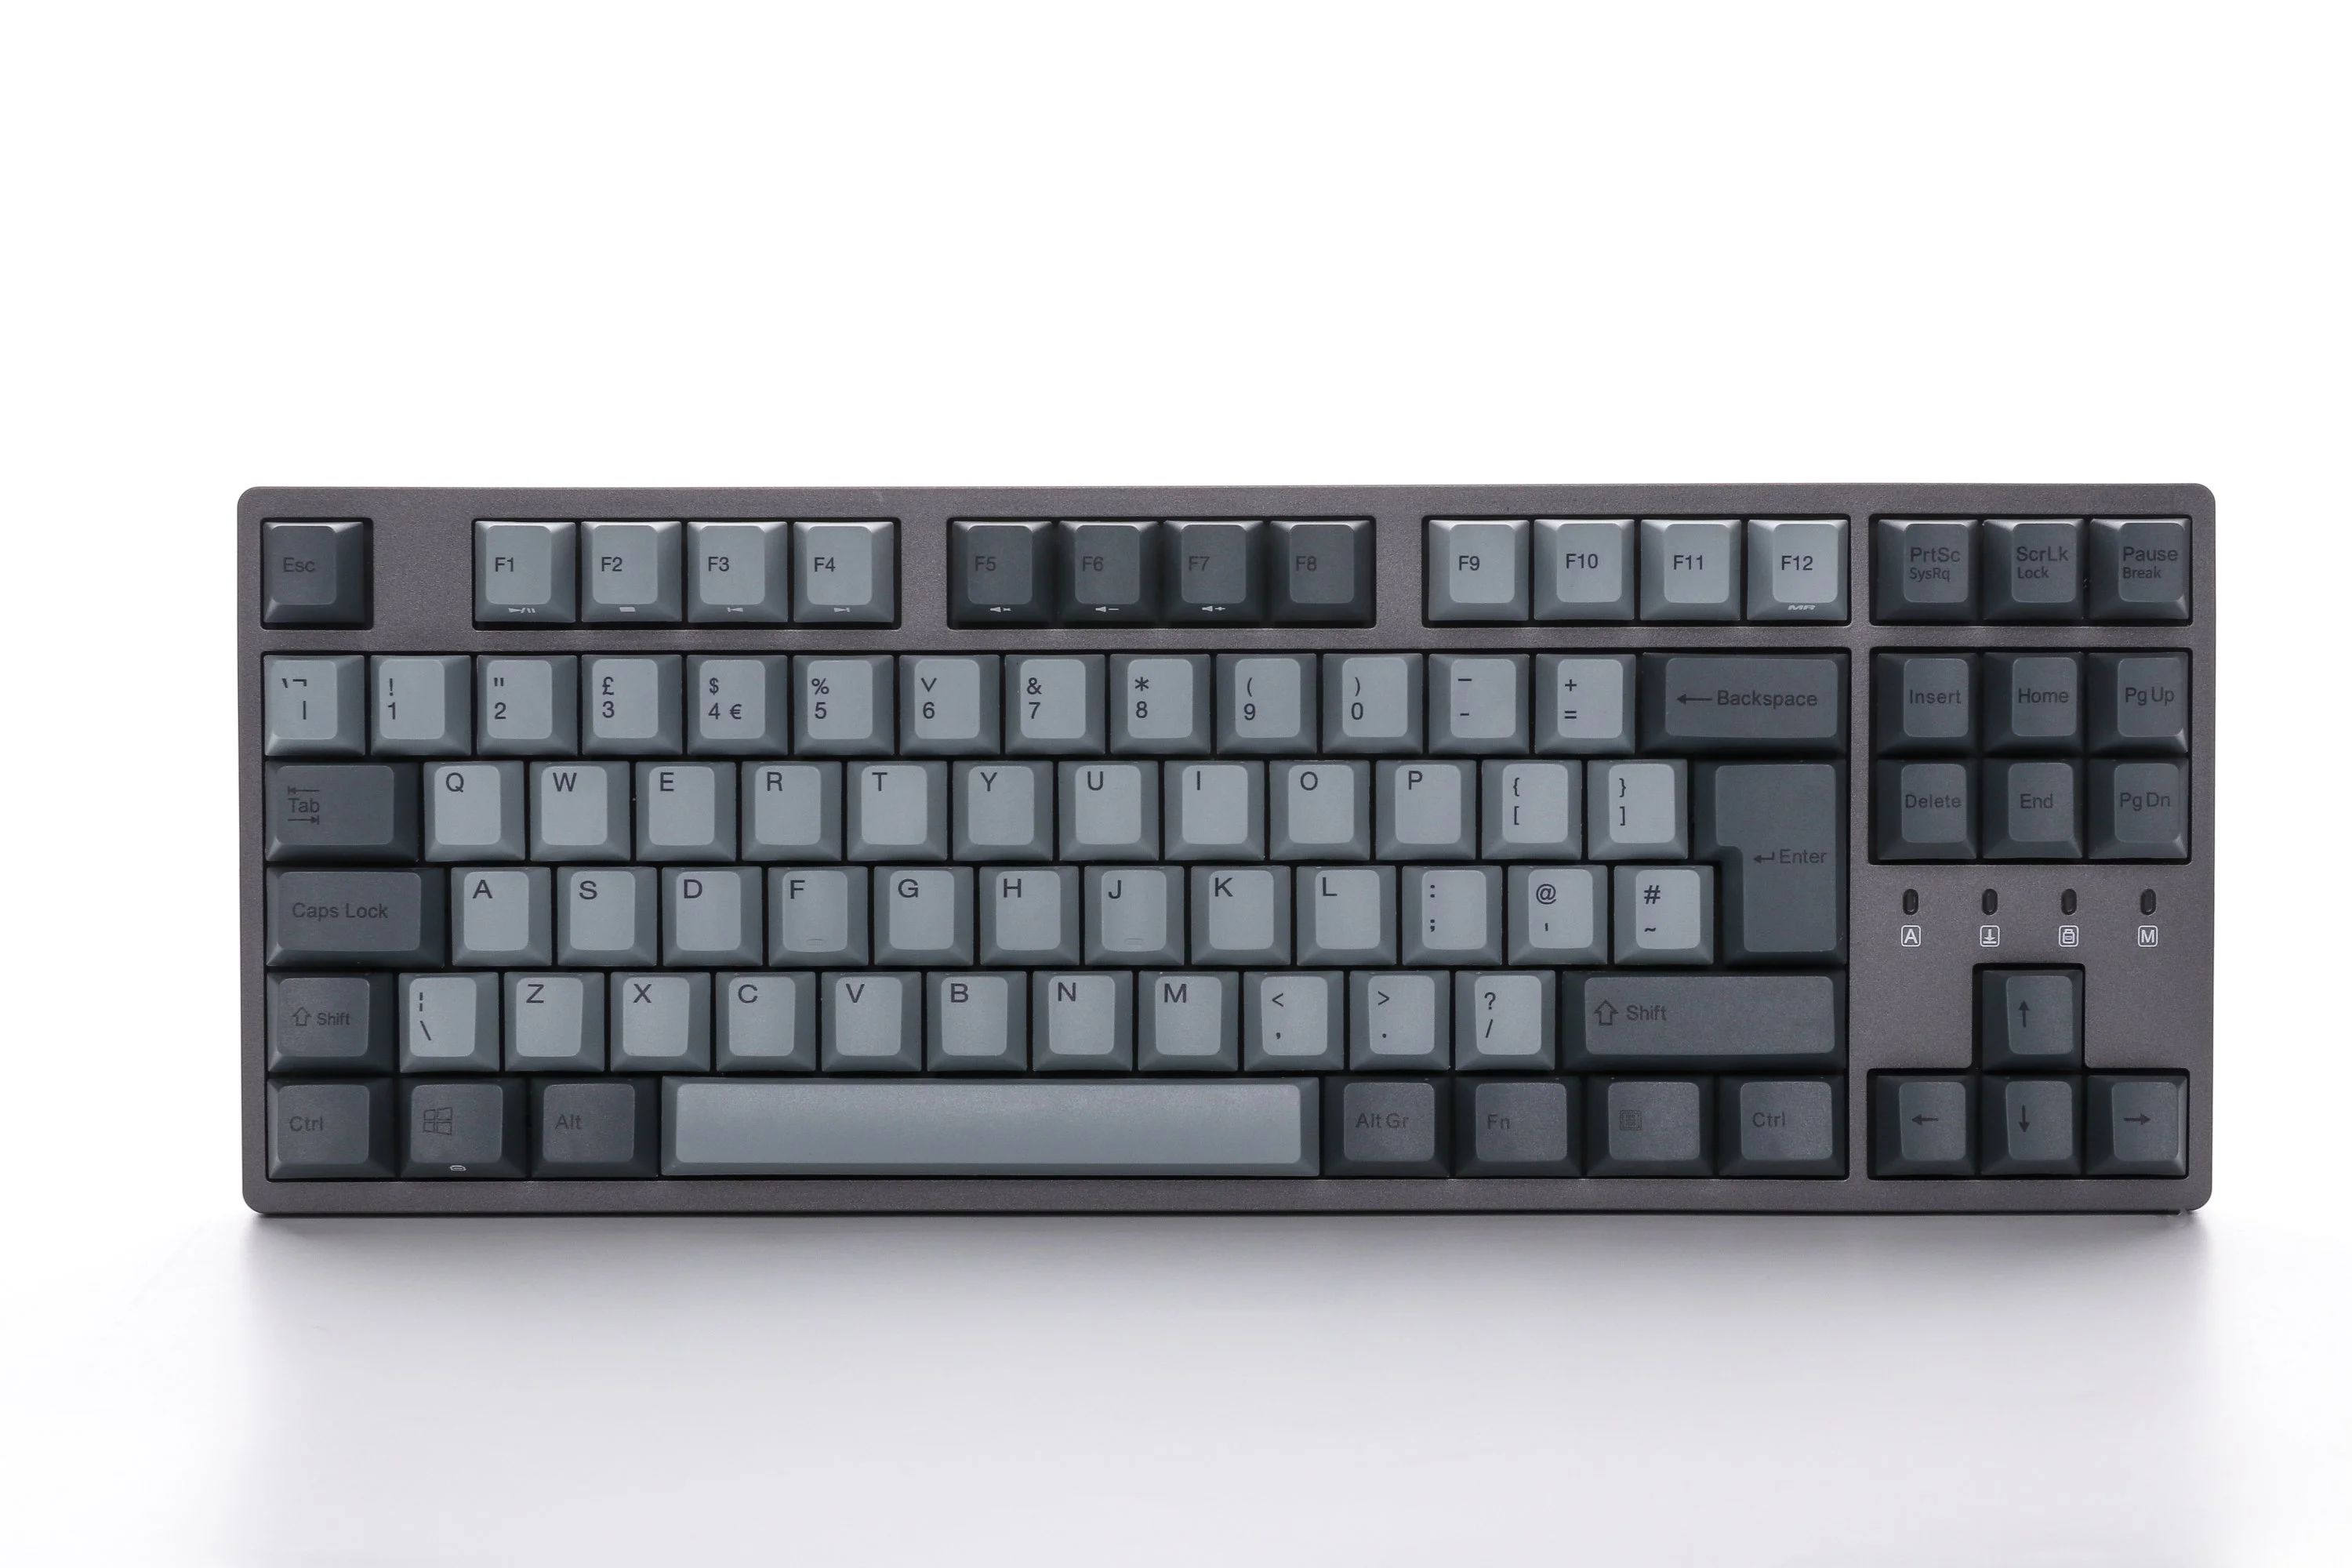 Mechanical keyboards better for typing